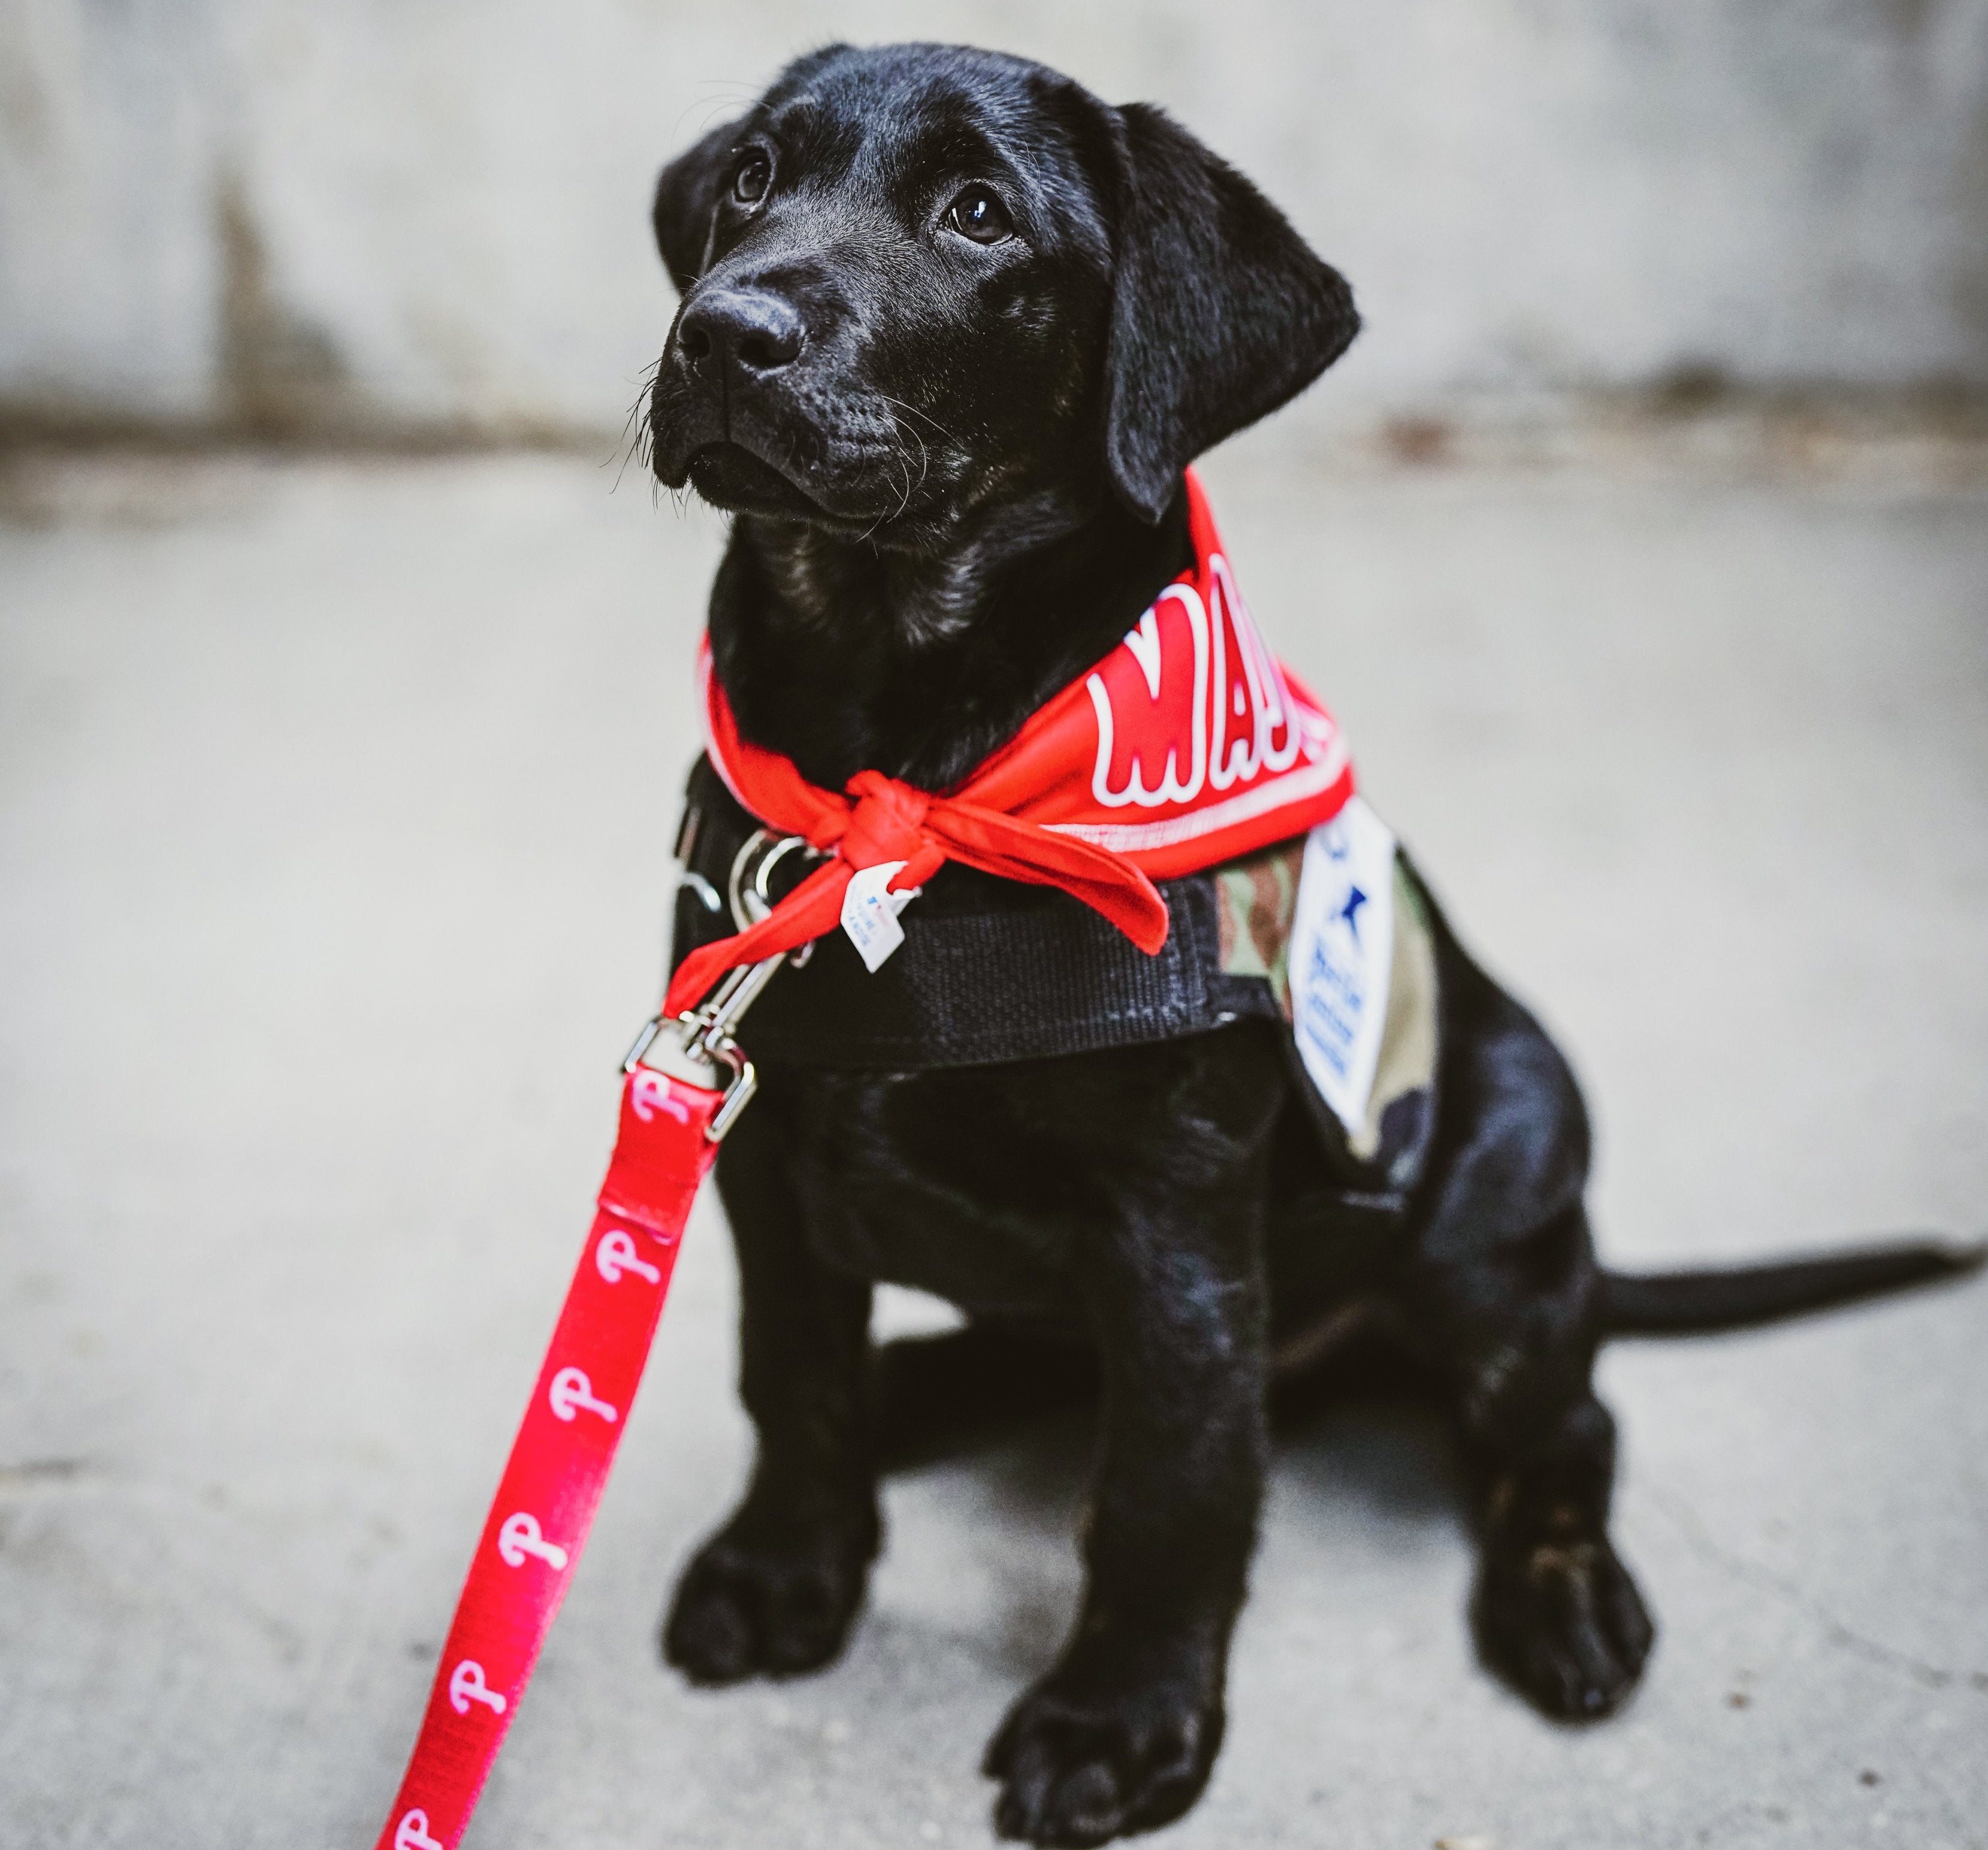 Meet Adorable Service Pup-In-Training At Philadelphia Phillies